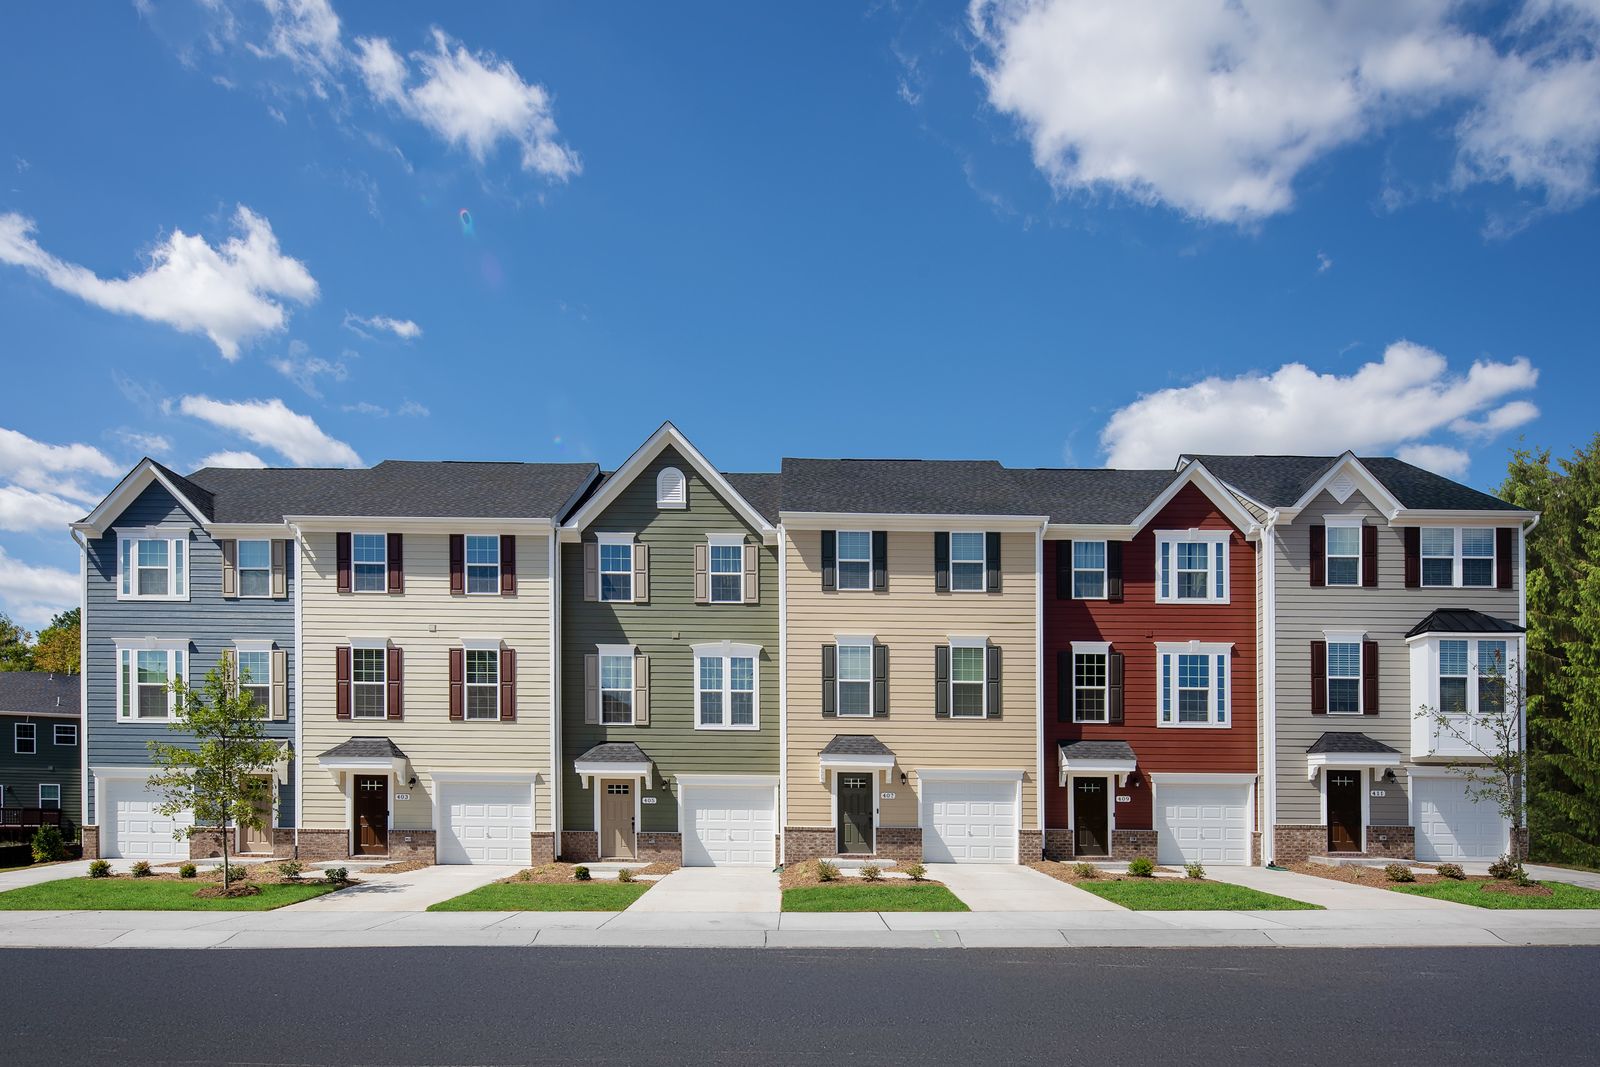 Townhomes in the Brier Creek Area